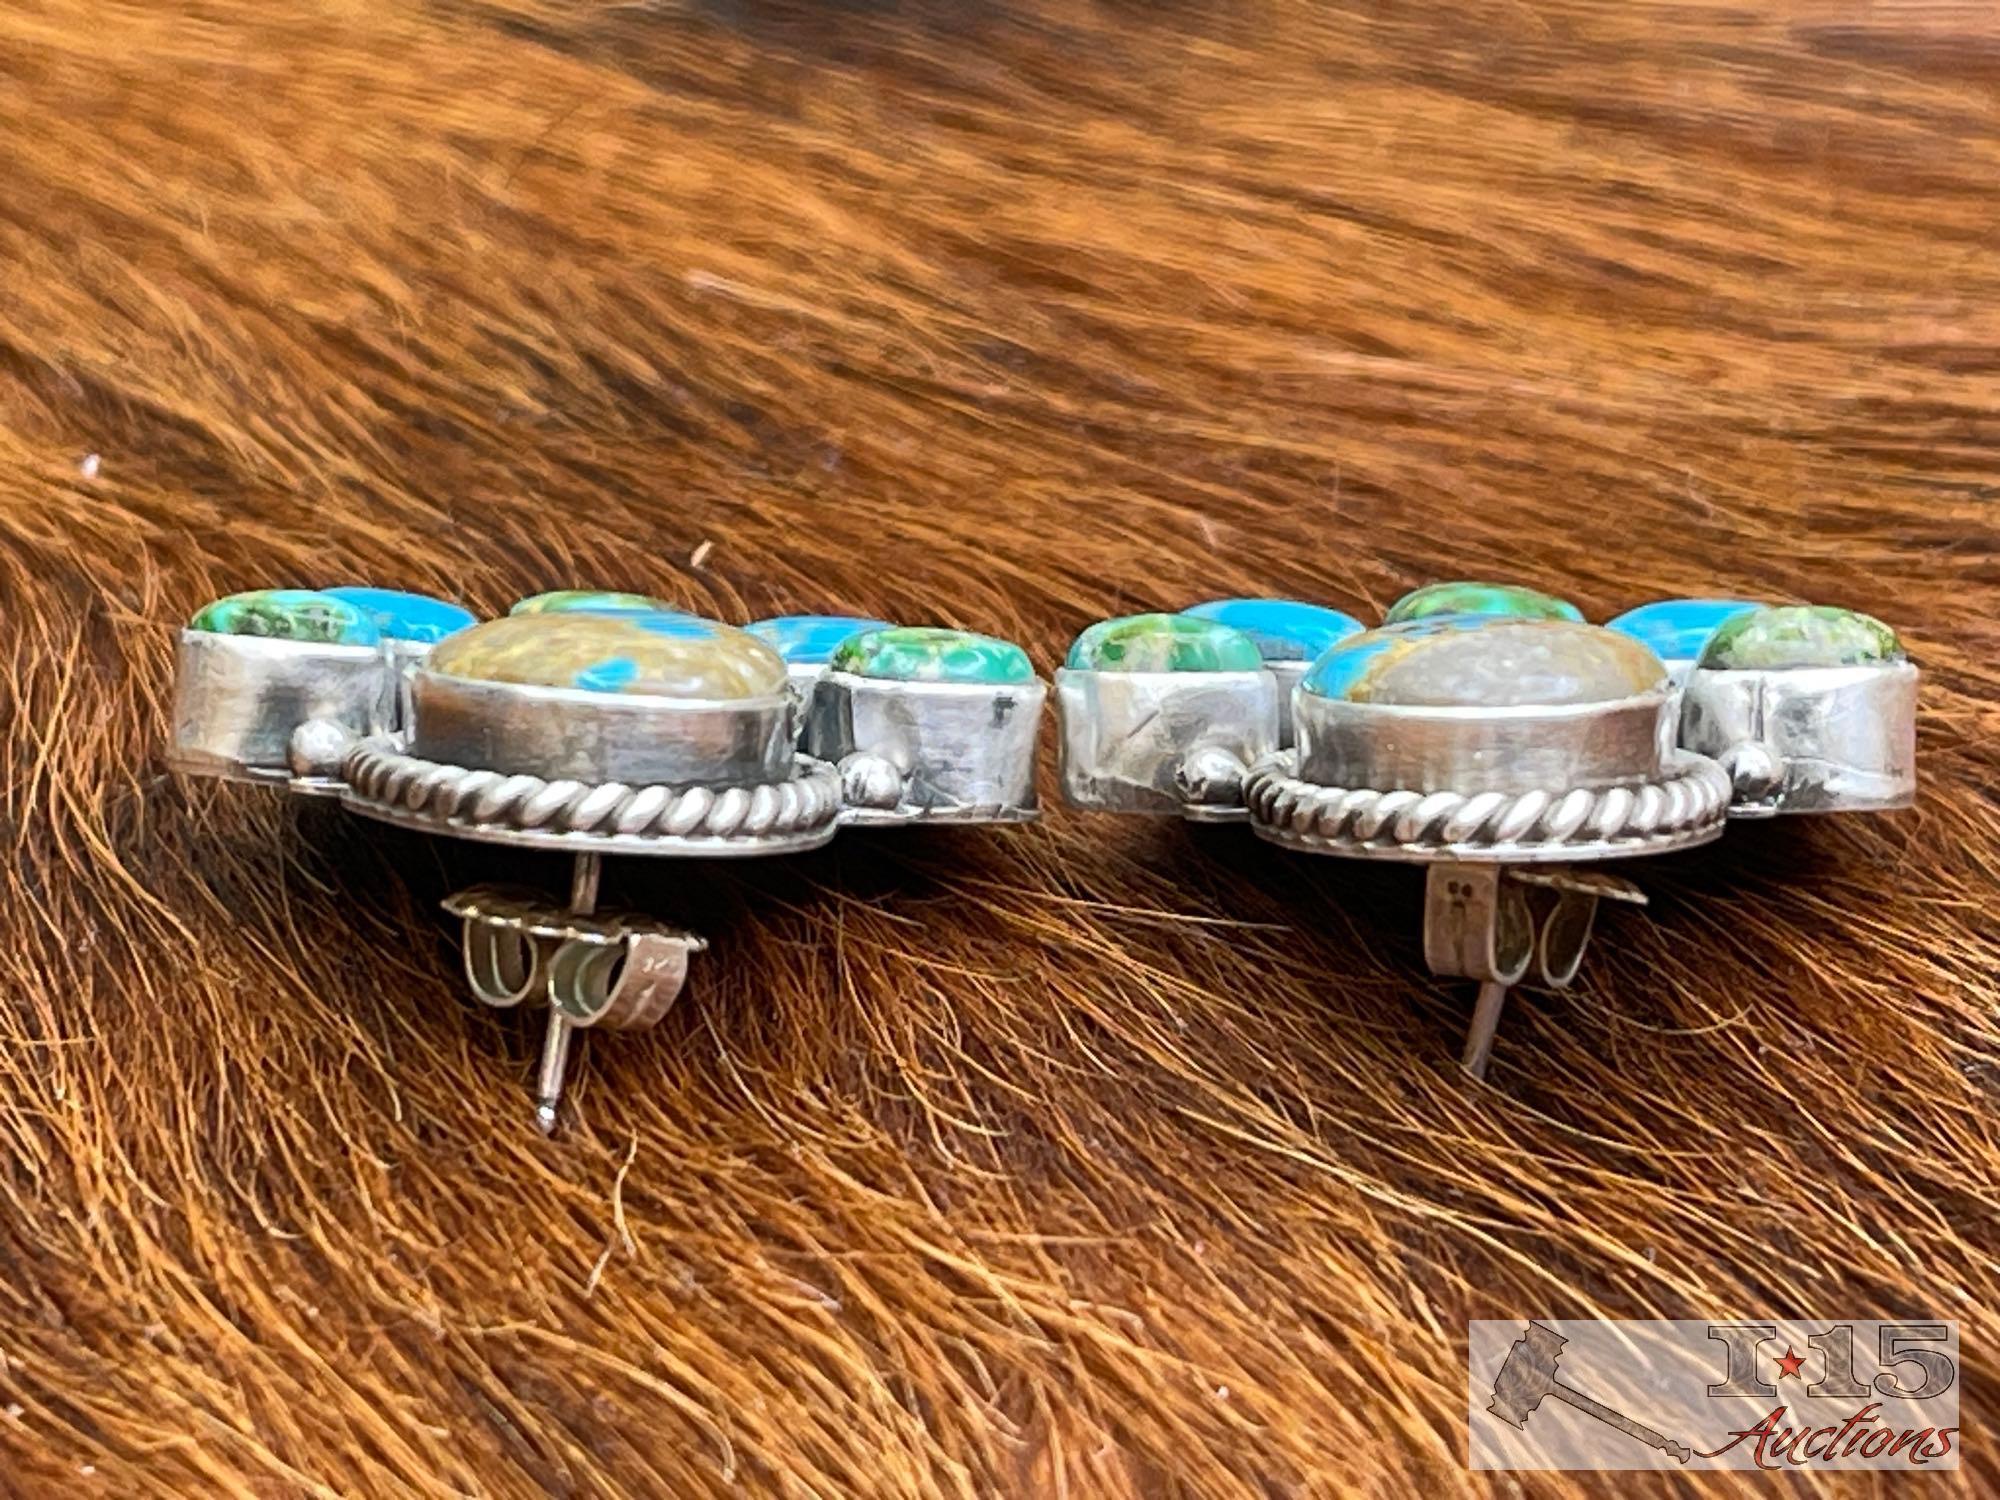 Museum Quality Native American Sterling Silver Turquoise Squash Blossom Set, 445g